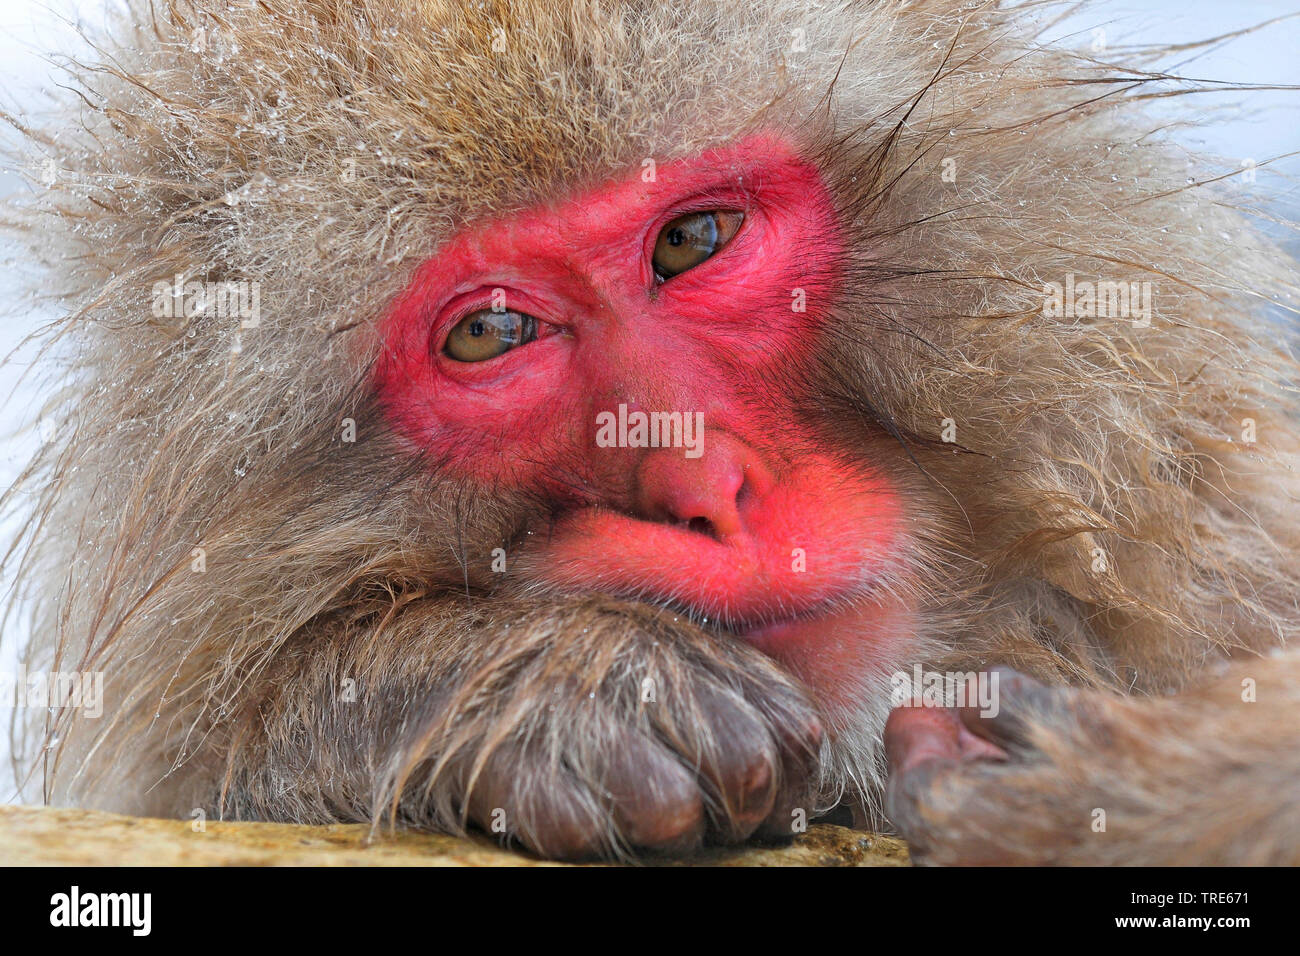 Japanese macaque, snow monkey (Macaca fuscata), bathing in a hot spring in winter, portrait, Japan, Hokkaido Stock Photo